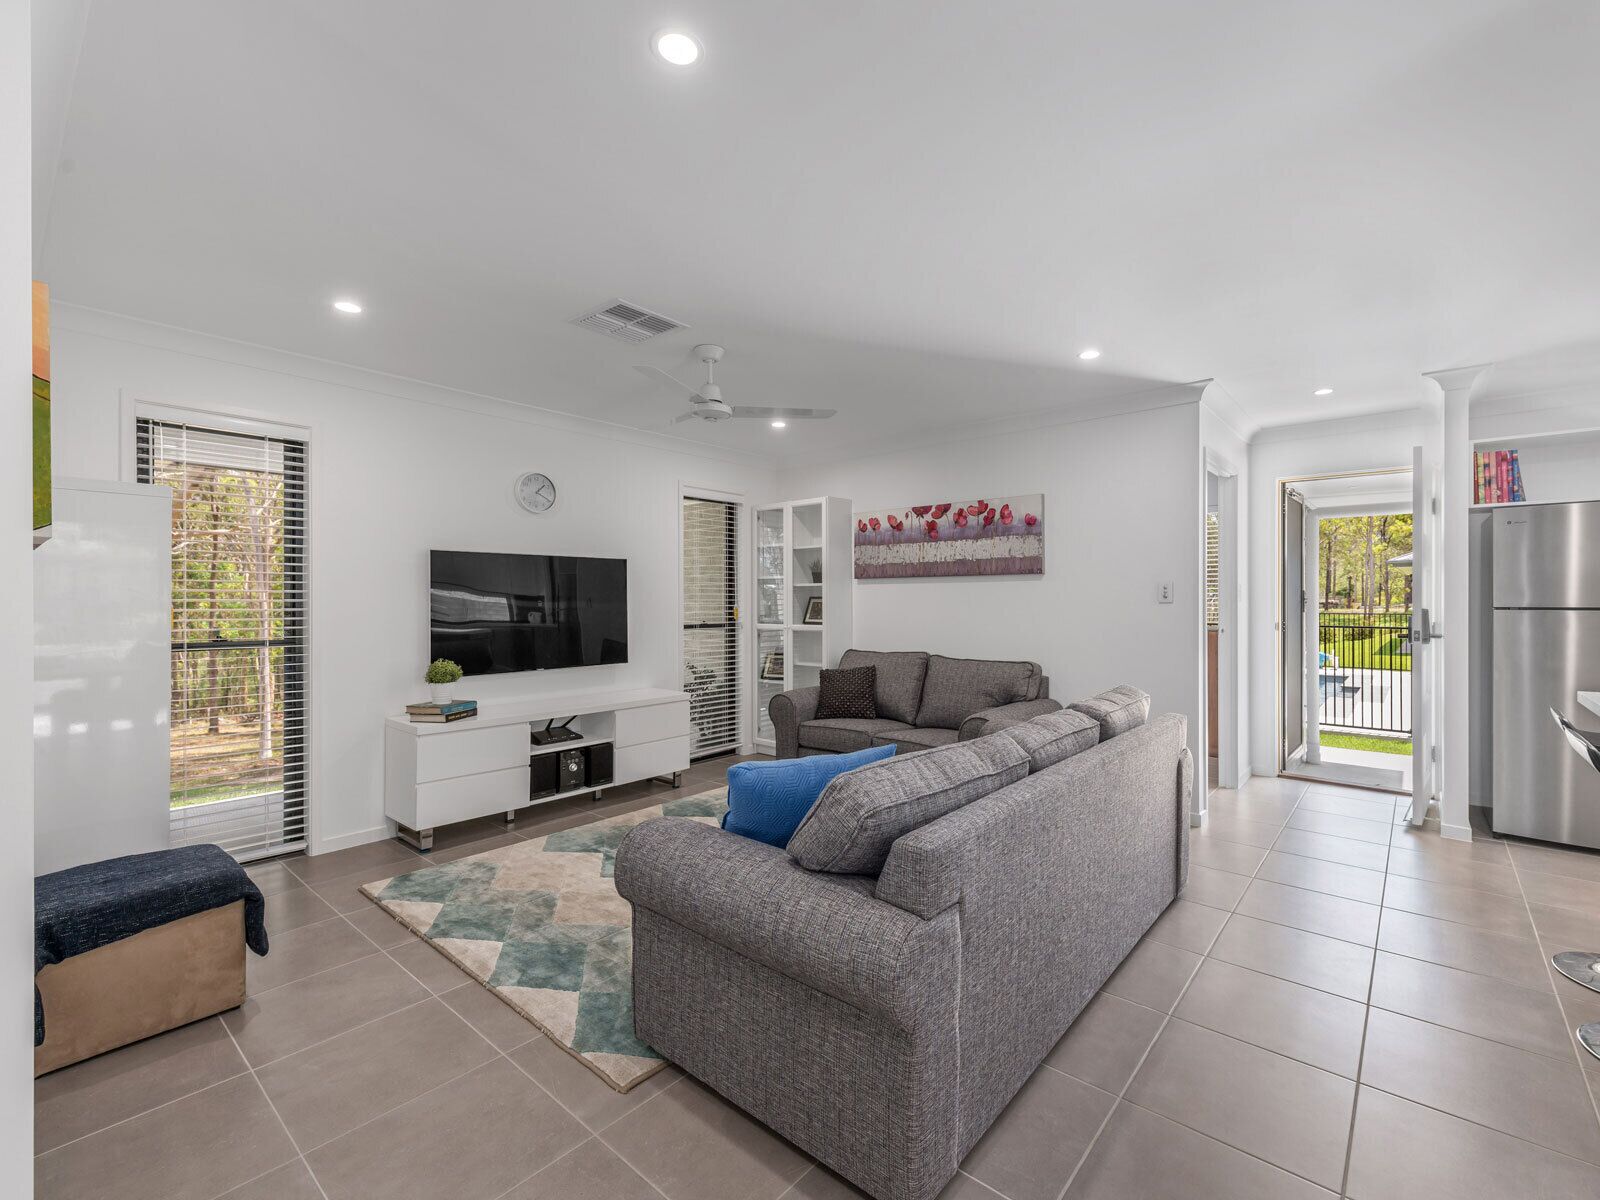 A tranquil bushland retreat with KB, Ducted AC and access to a heated pool.